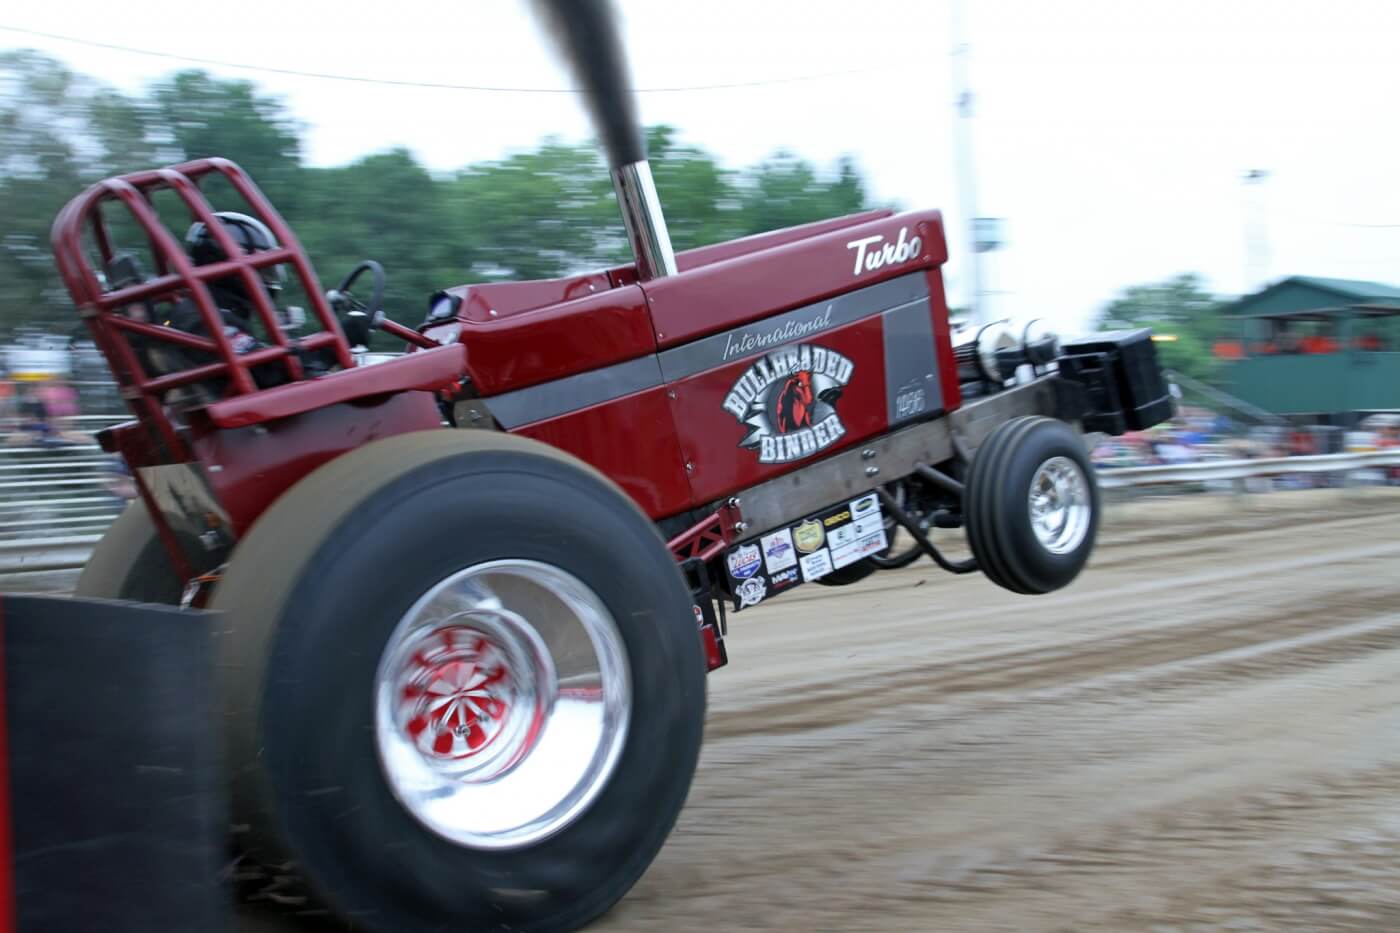 Our photographer got an up-close view of the “Bullheaded Binder” as it flew past him on the track.